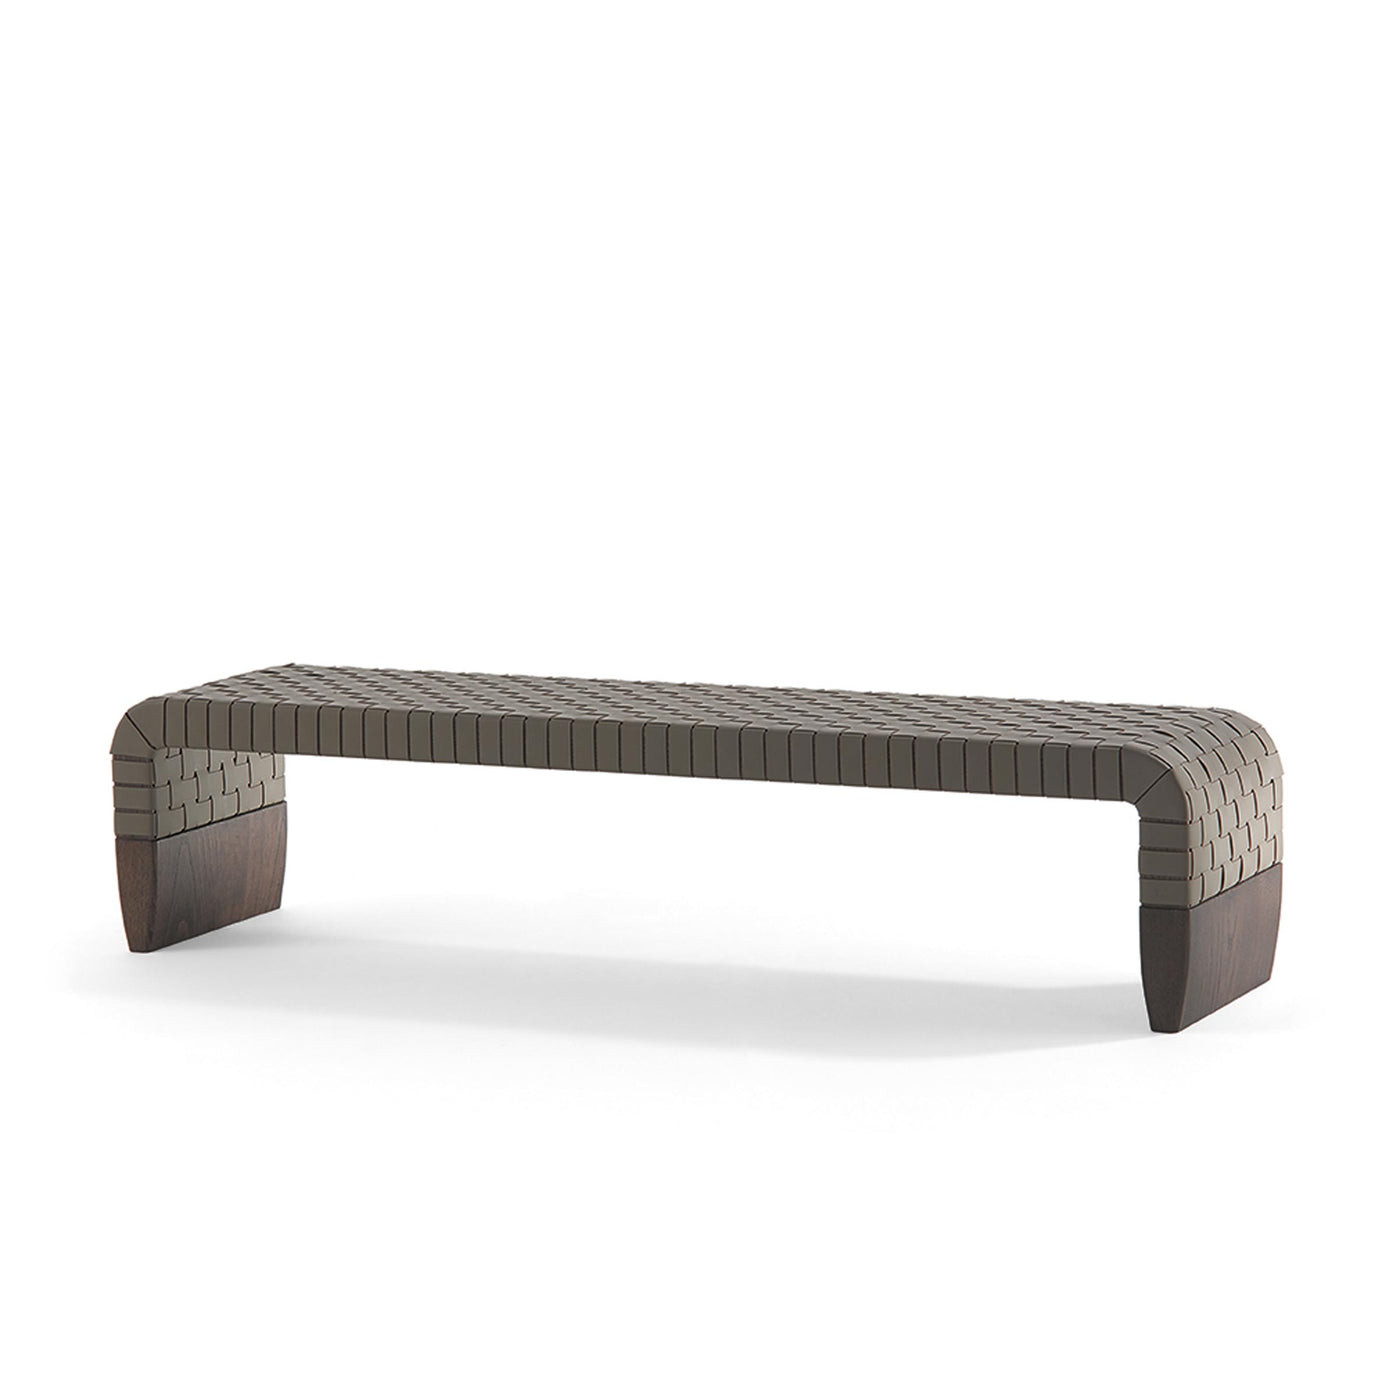 Wood and Leather Bench BRERA by Guglielmo Ulrich for Poltrona Frau 01